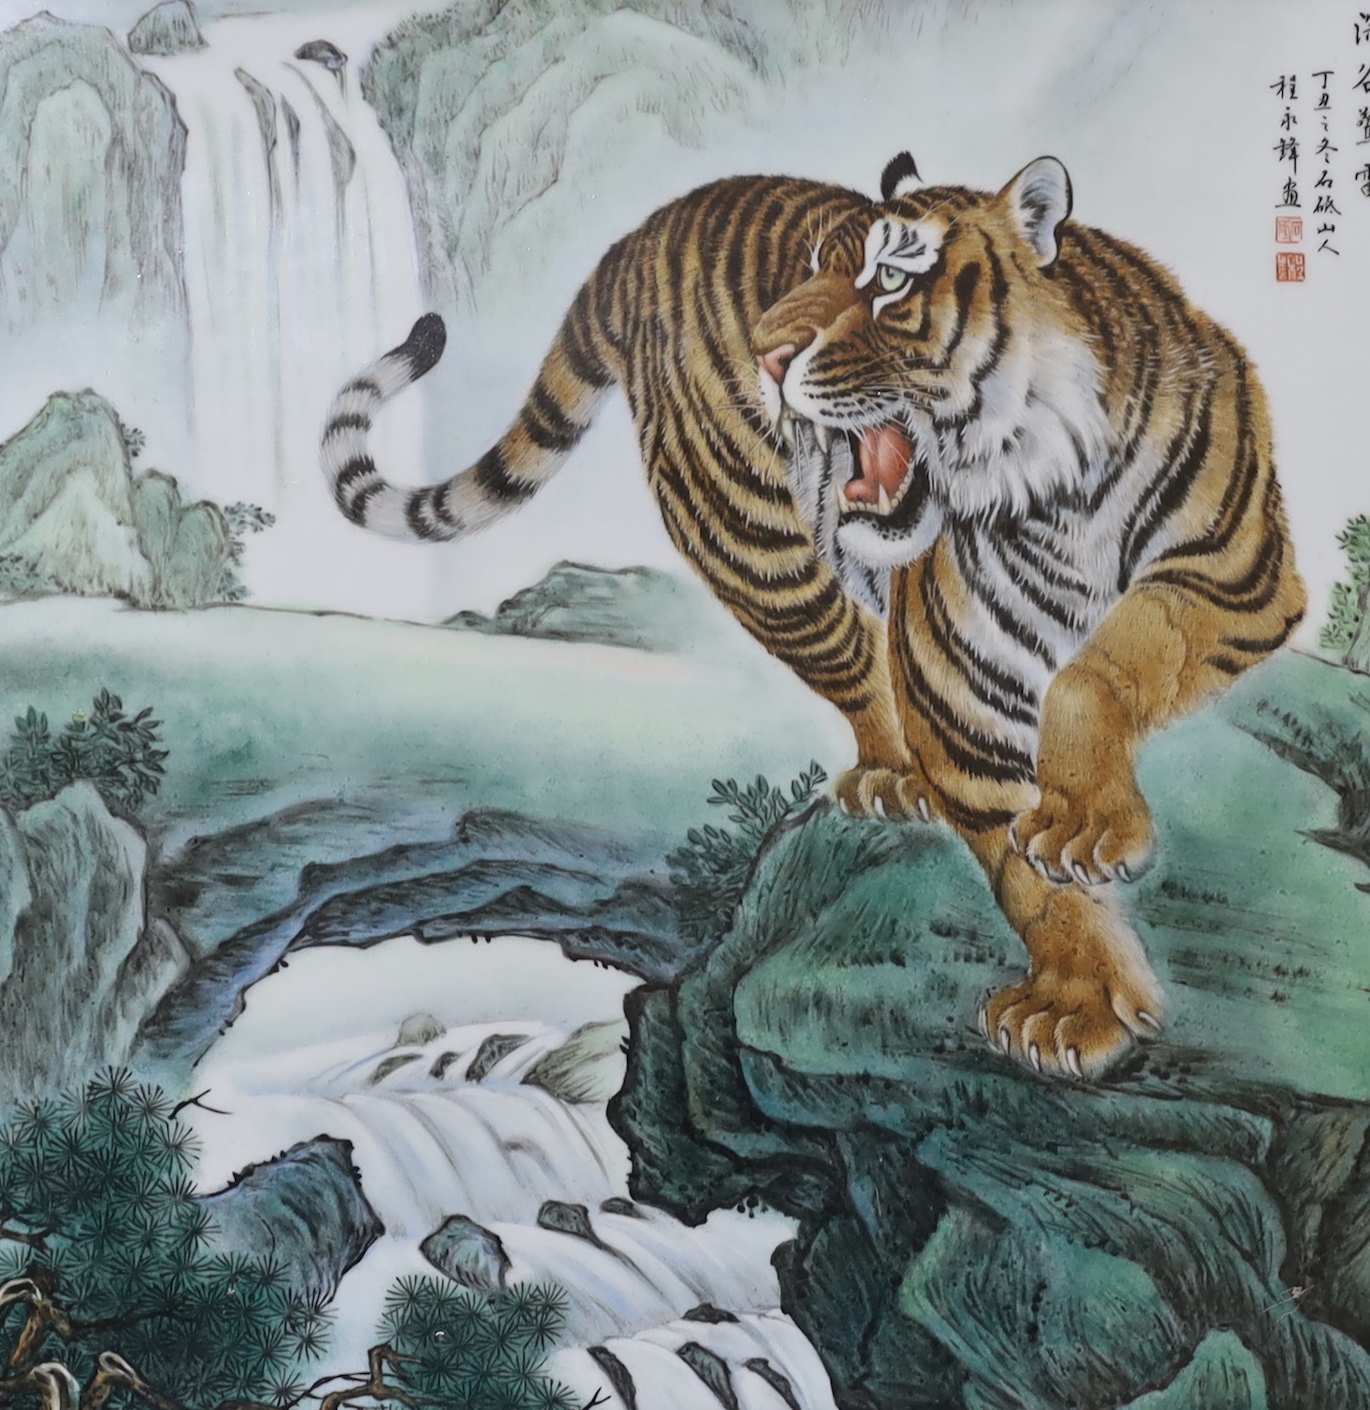 Two Chinese framed enamelled porcelain plaques, one of a tiger and another of two girls, largest 32cm wide x55cm high